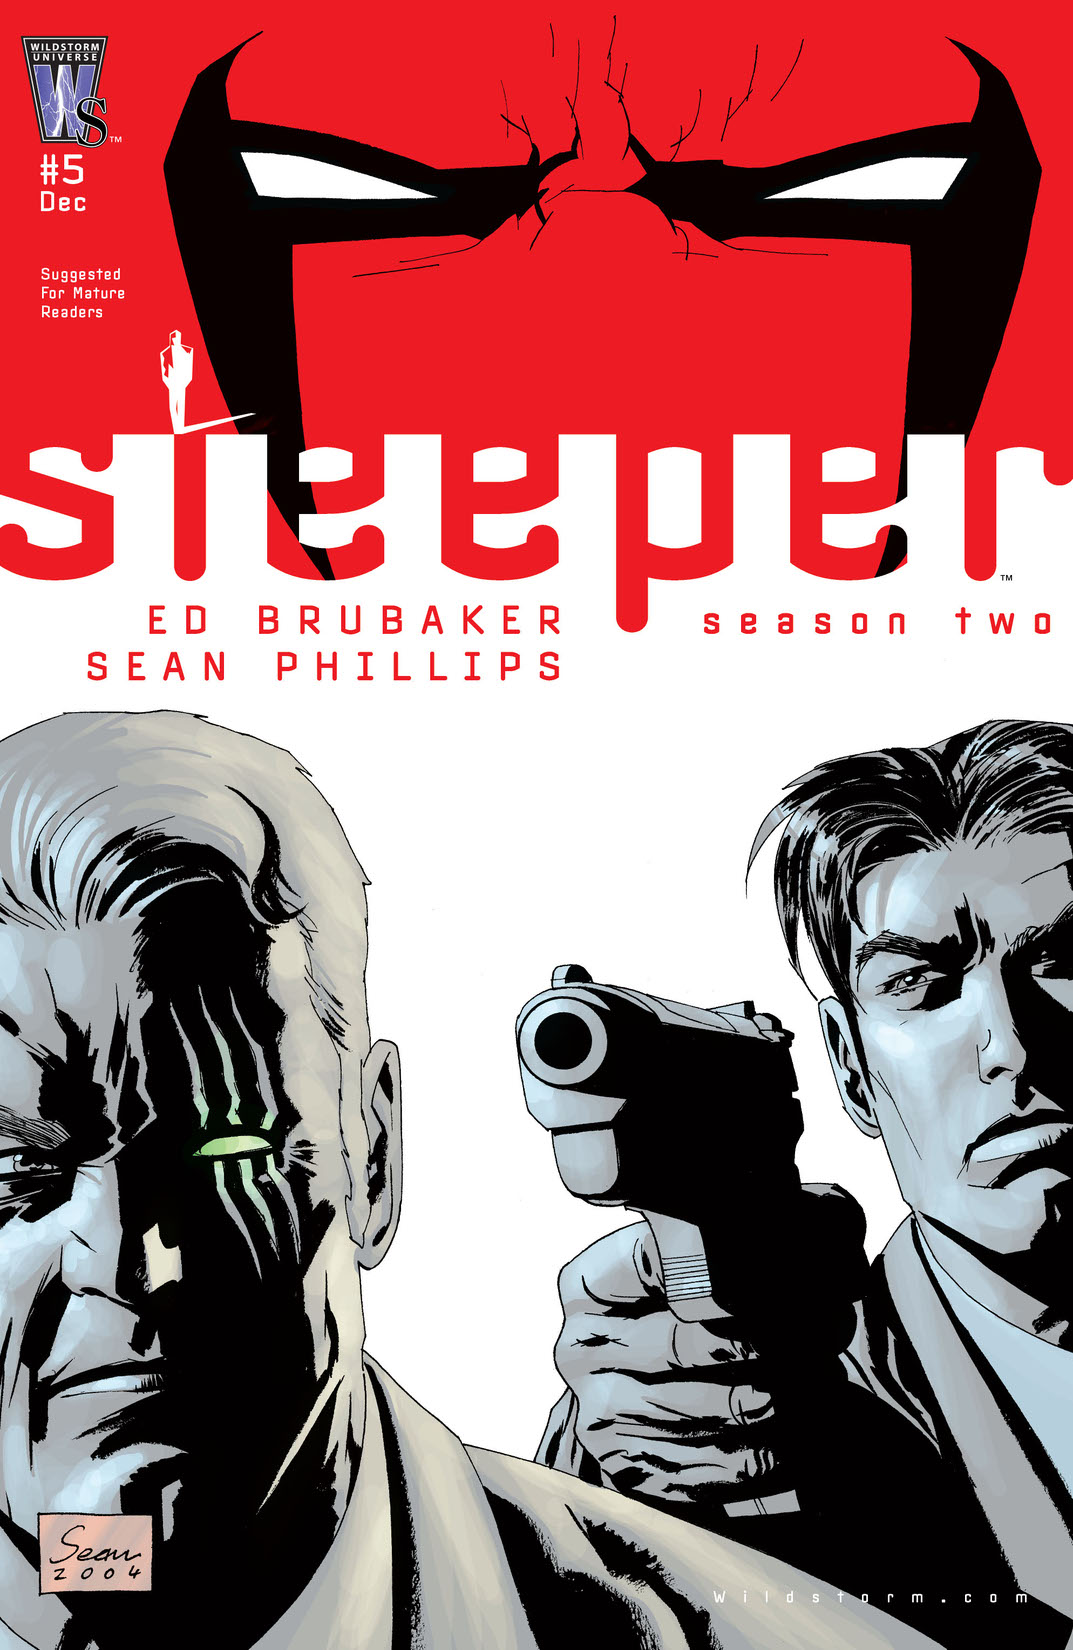 Sleeper Season 2 #5 preview images